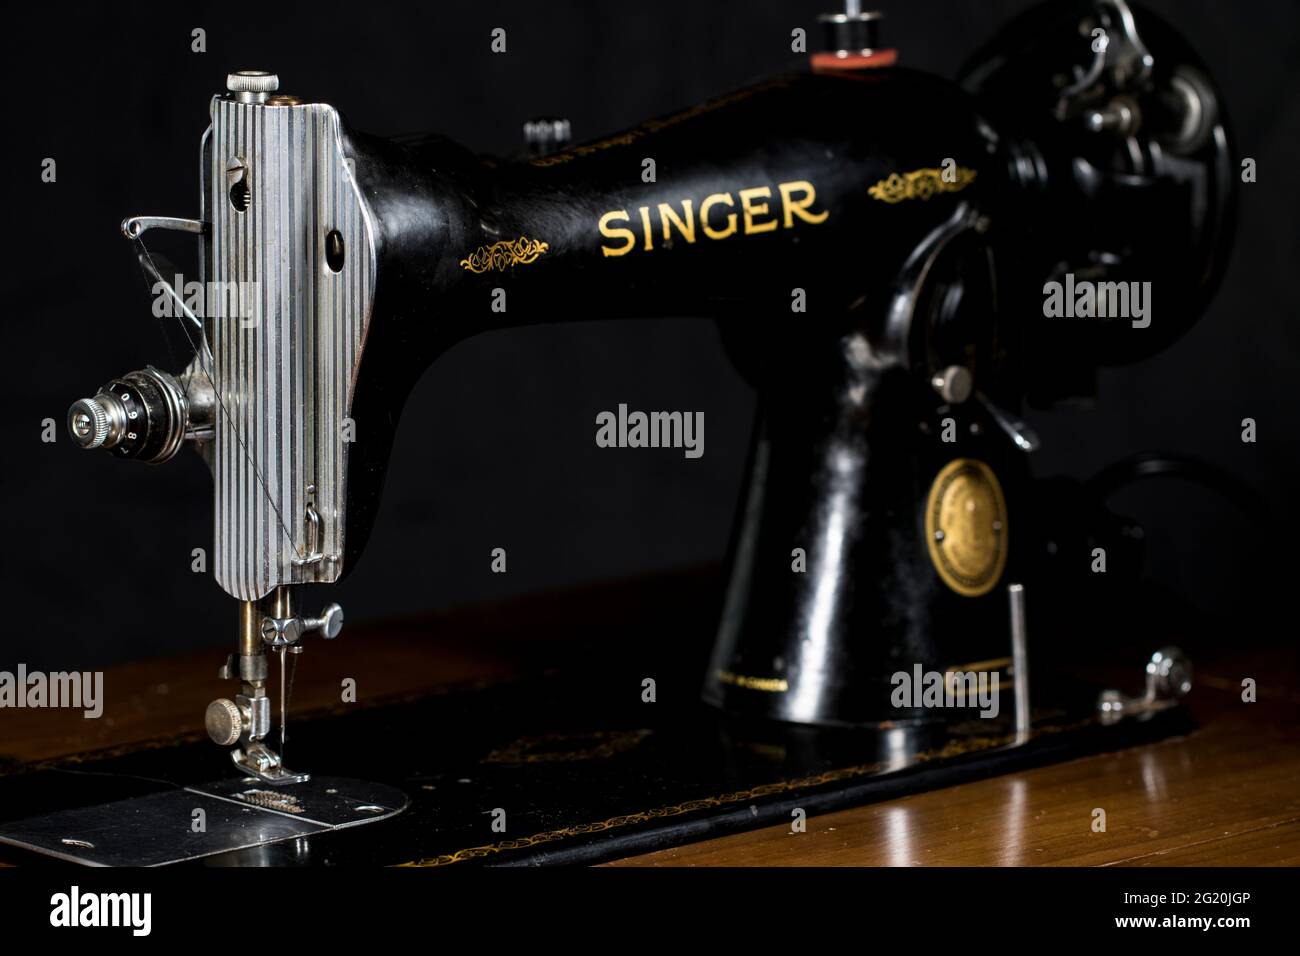 Vintage sewing machine close up singer 15-91. Black and gold detailed retro Singer sewing machine. Stock Photo